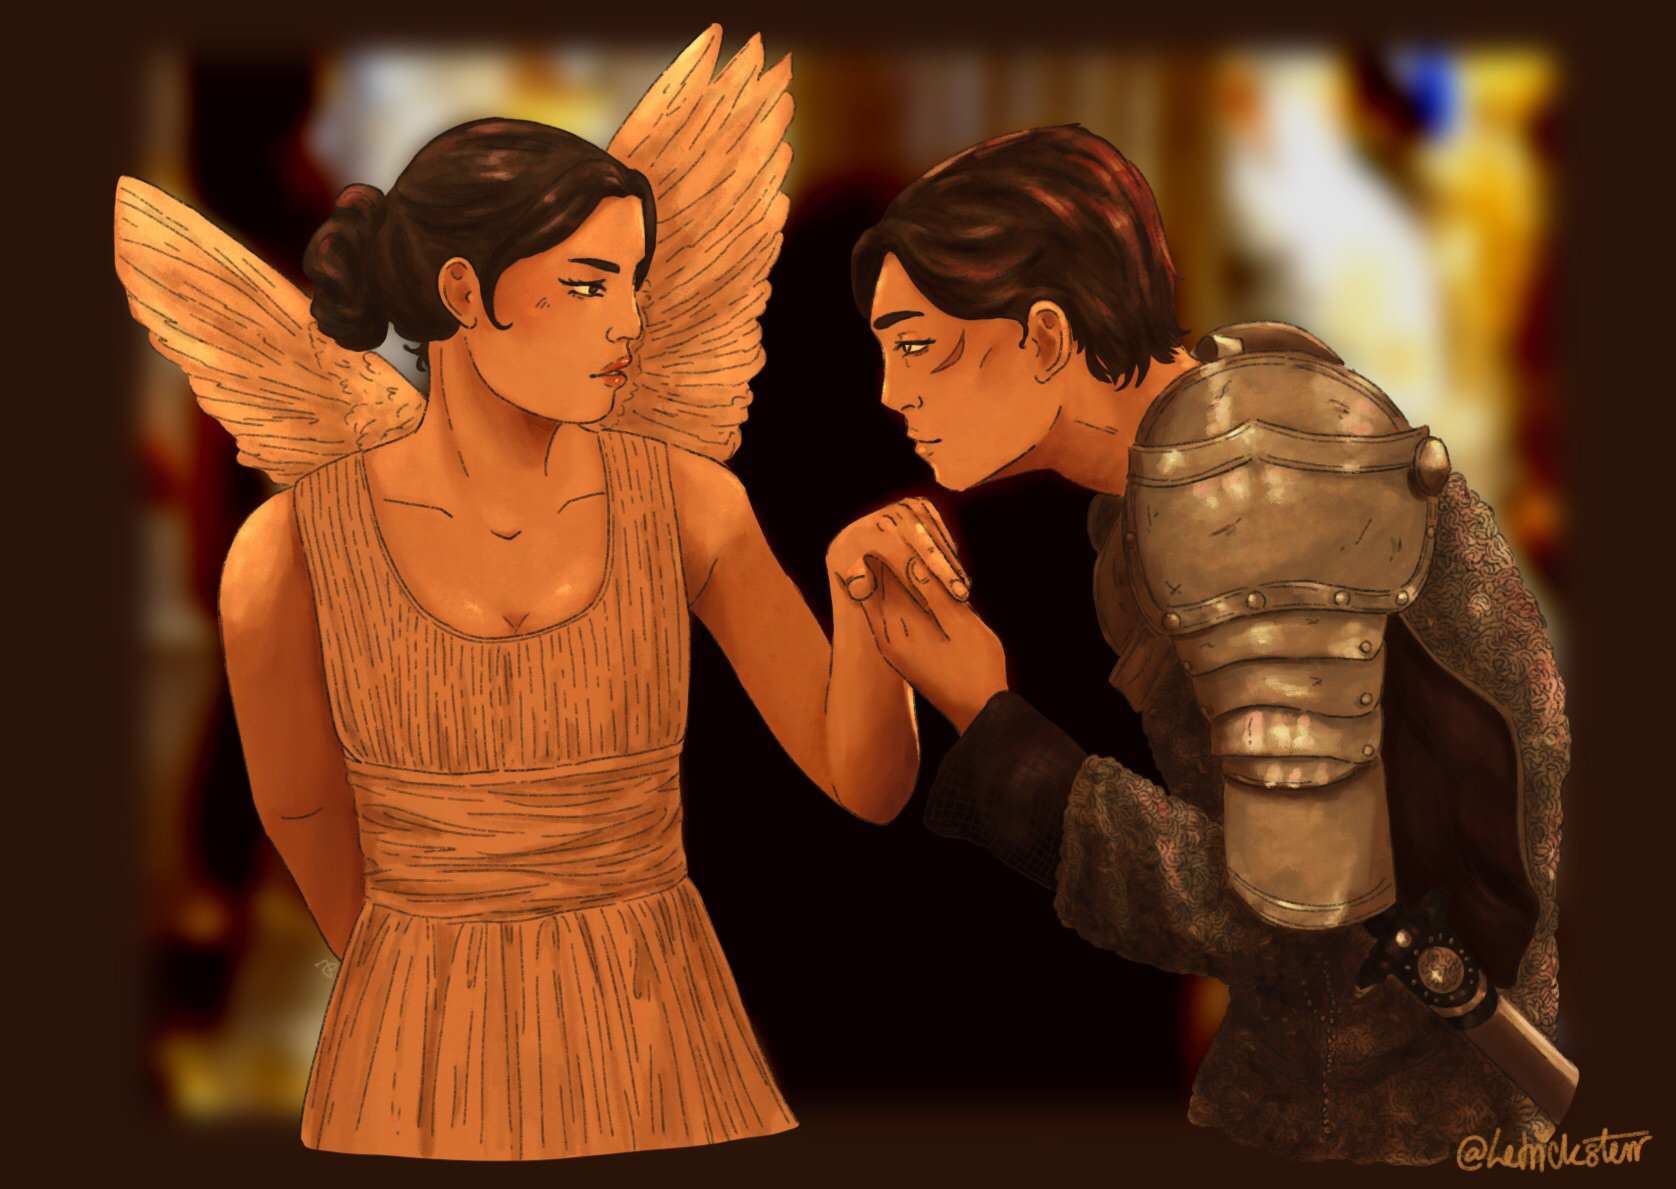 A drawing of Nangong Jingnu and Qi Yan from Clear and Muddy Loss of Love as Baz Lehrman's Romeo and Juliet. Jingnu is dressed as an angel, Qi Yan as a knight. Qi Yan has kissed Jingnu's hand and they are looking at each other lovingly.